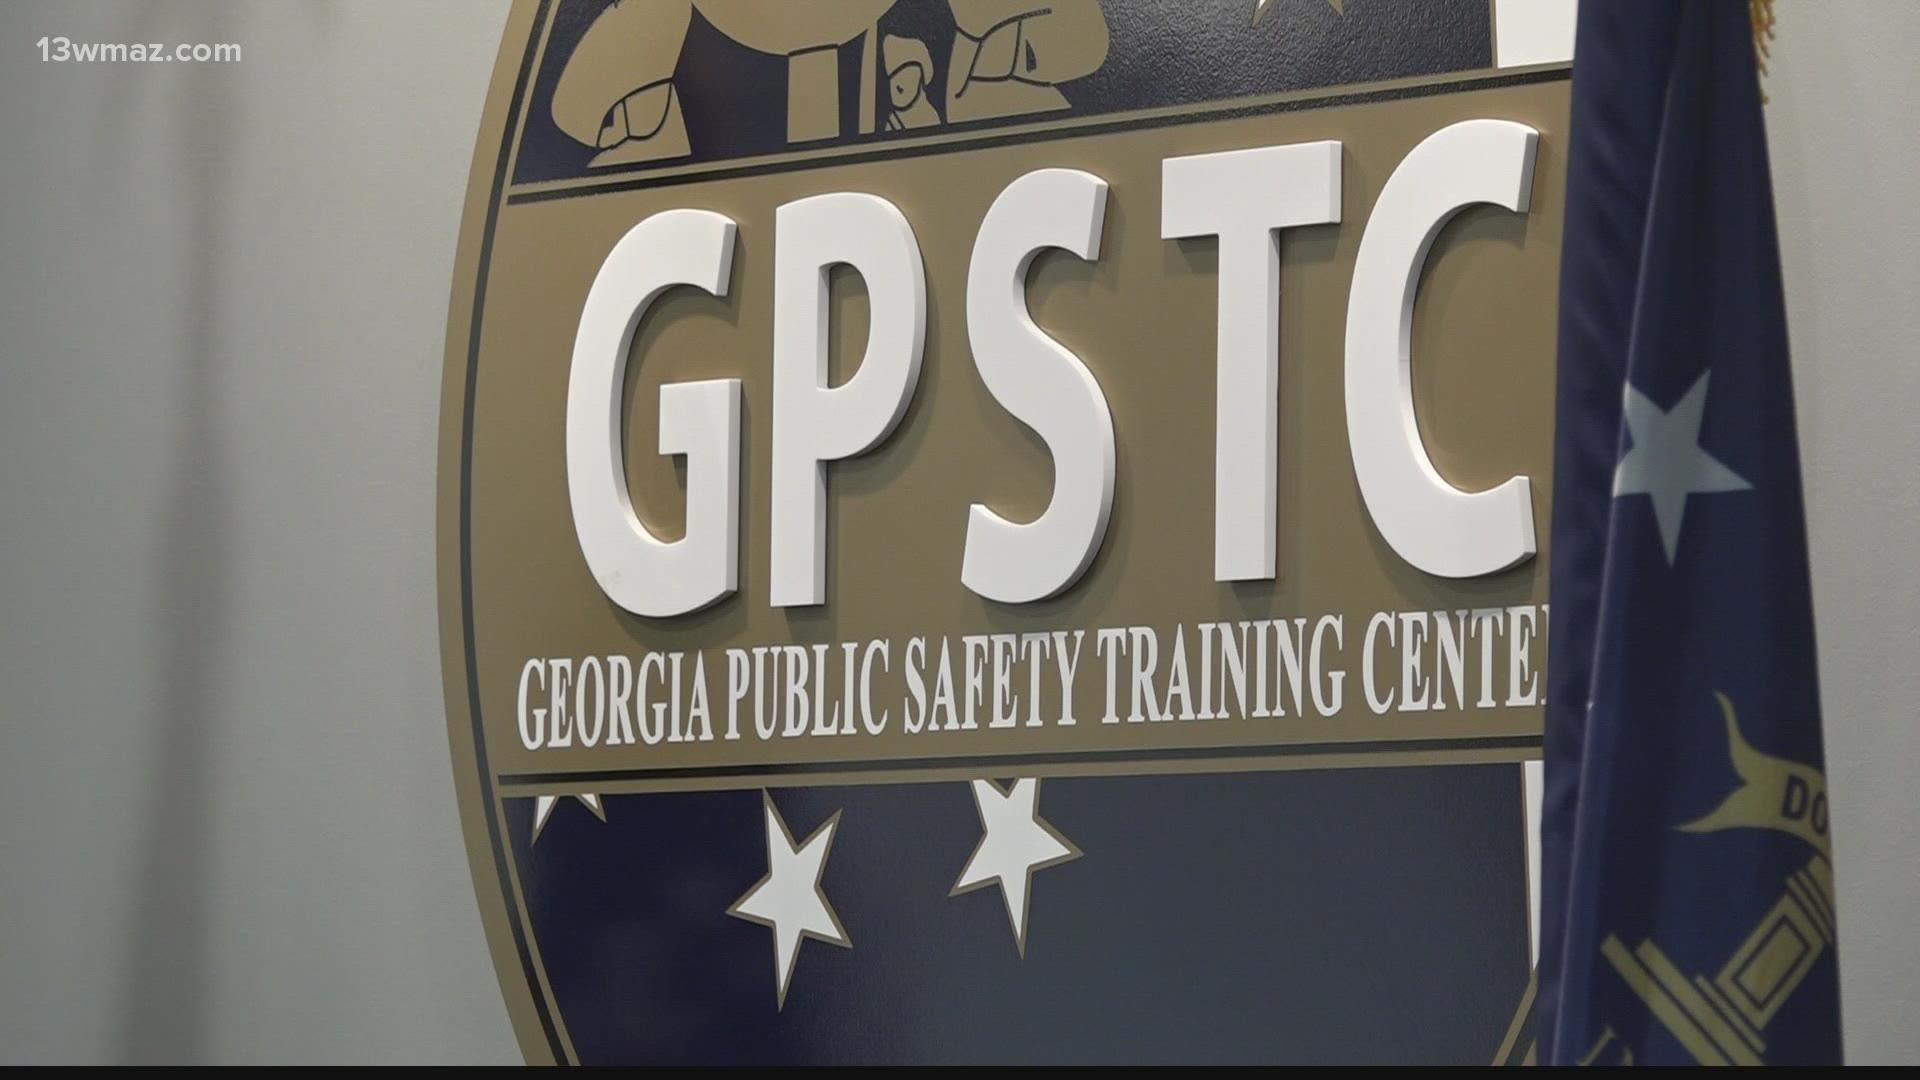 Move than 120 law enforcement agencies across Georgia came to Monroe County to learn more about public safety.